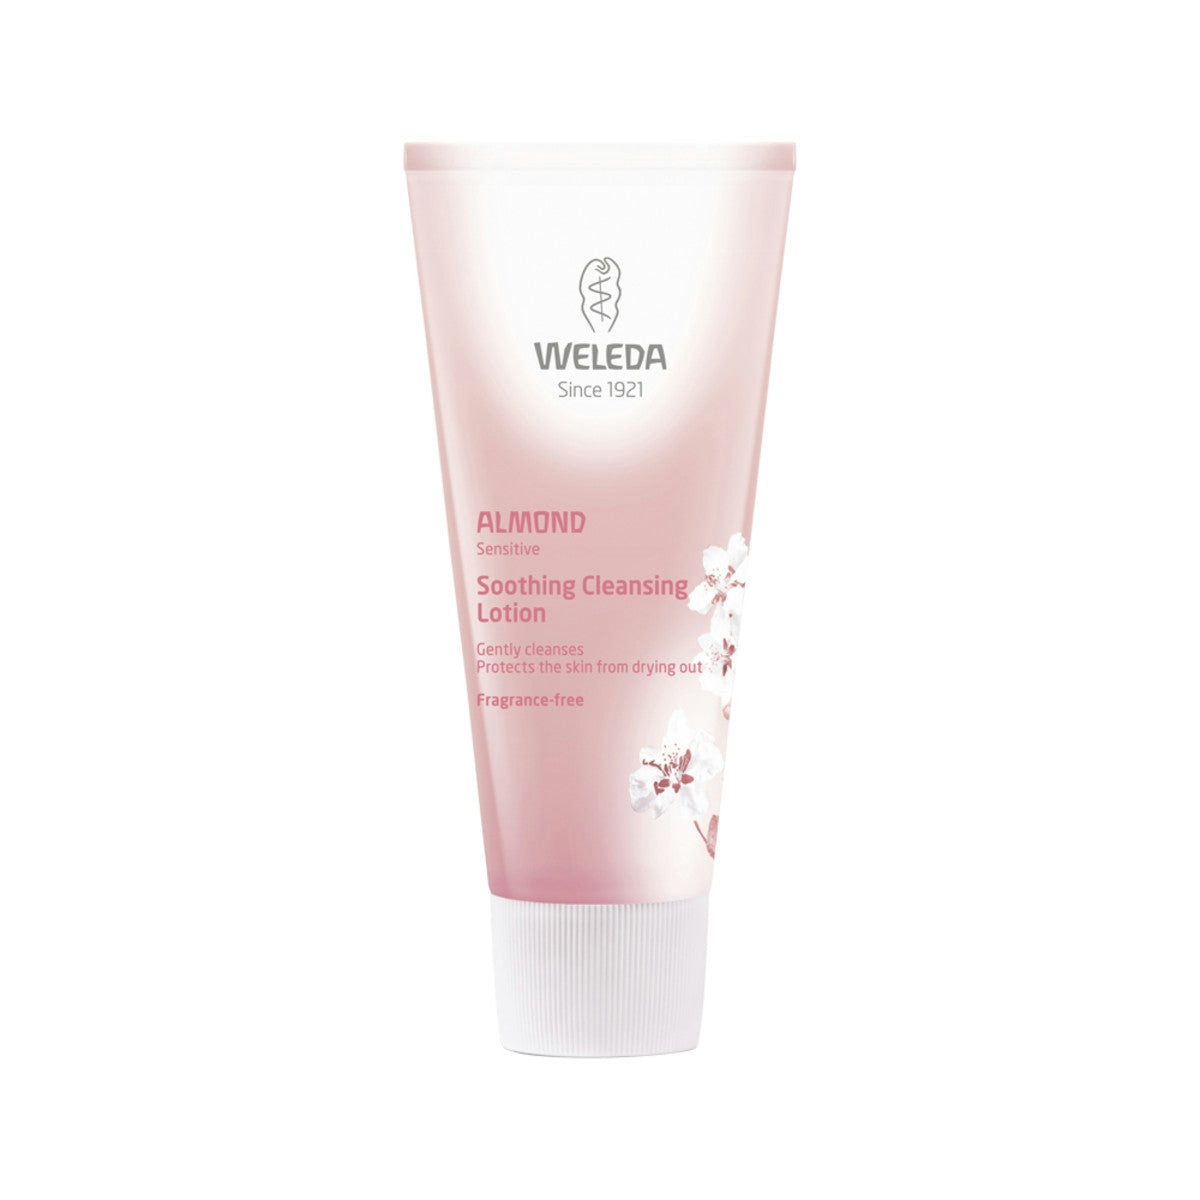 image of Weleda Soothing Cleansing Lotion Almond (Sensitive) Fragrance-Free 75ml on white background